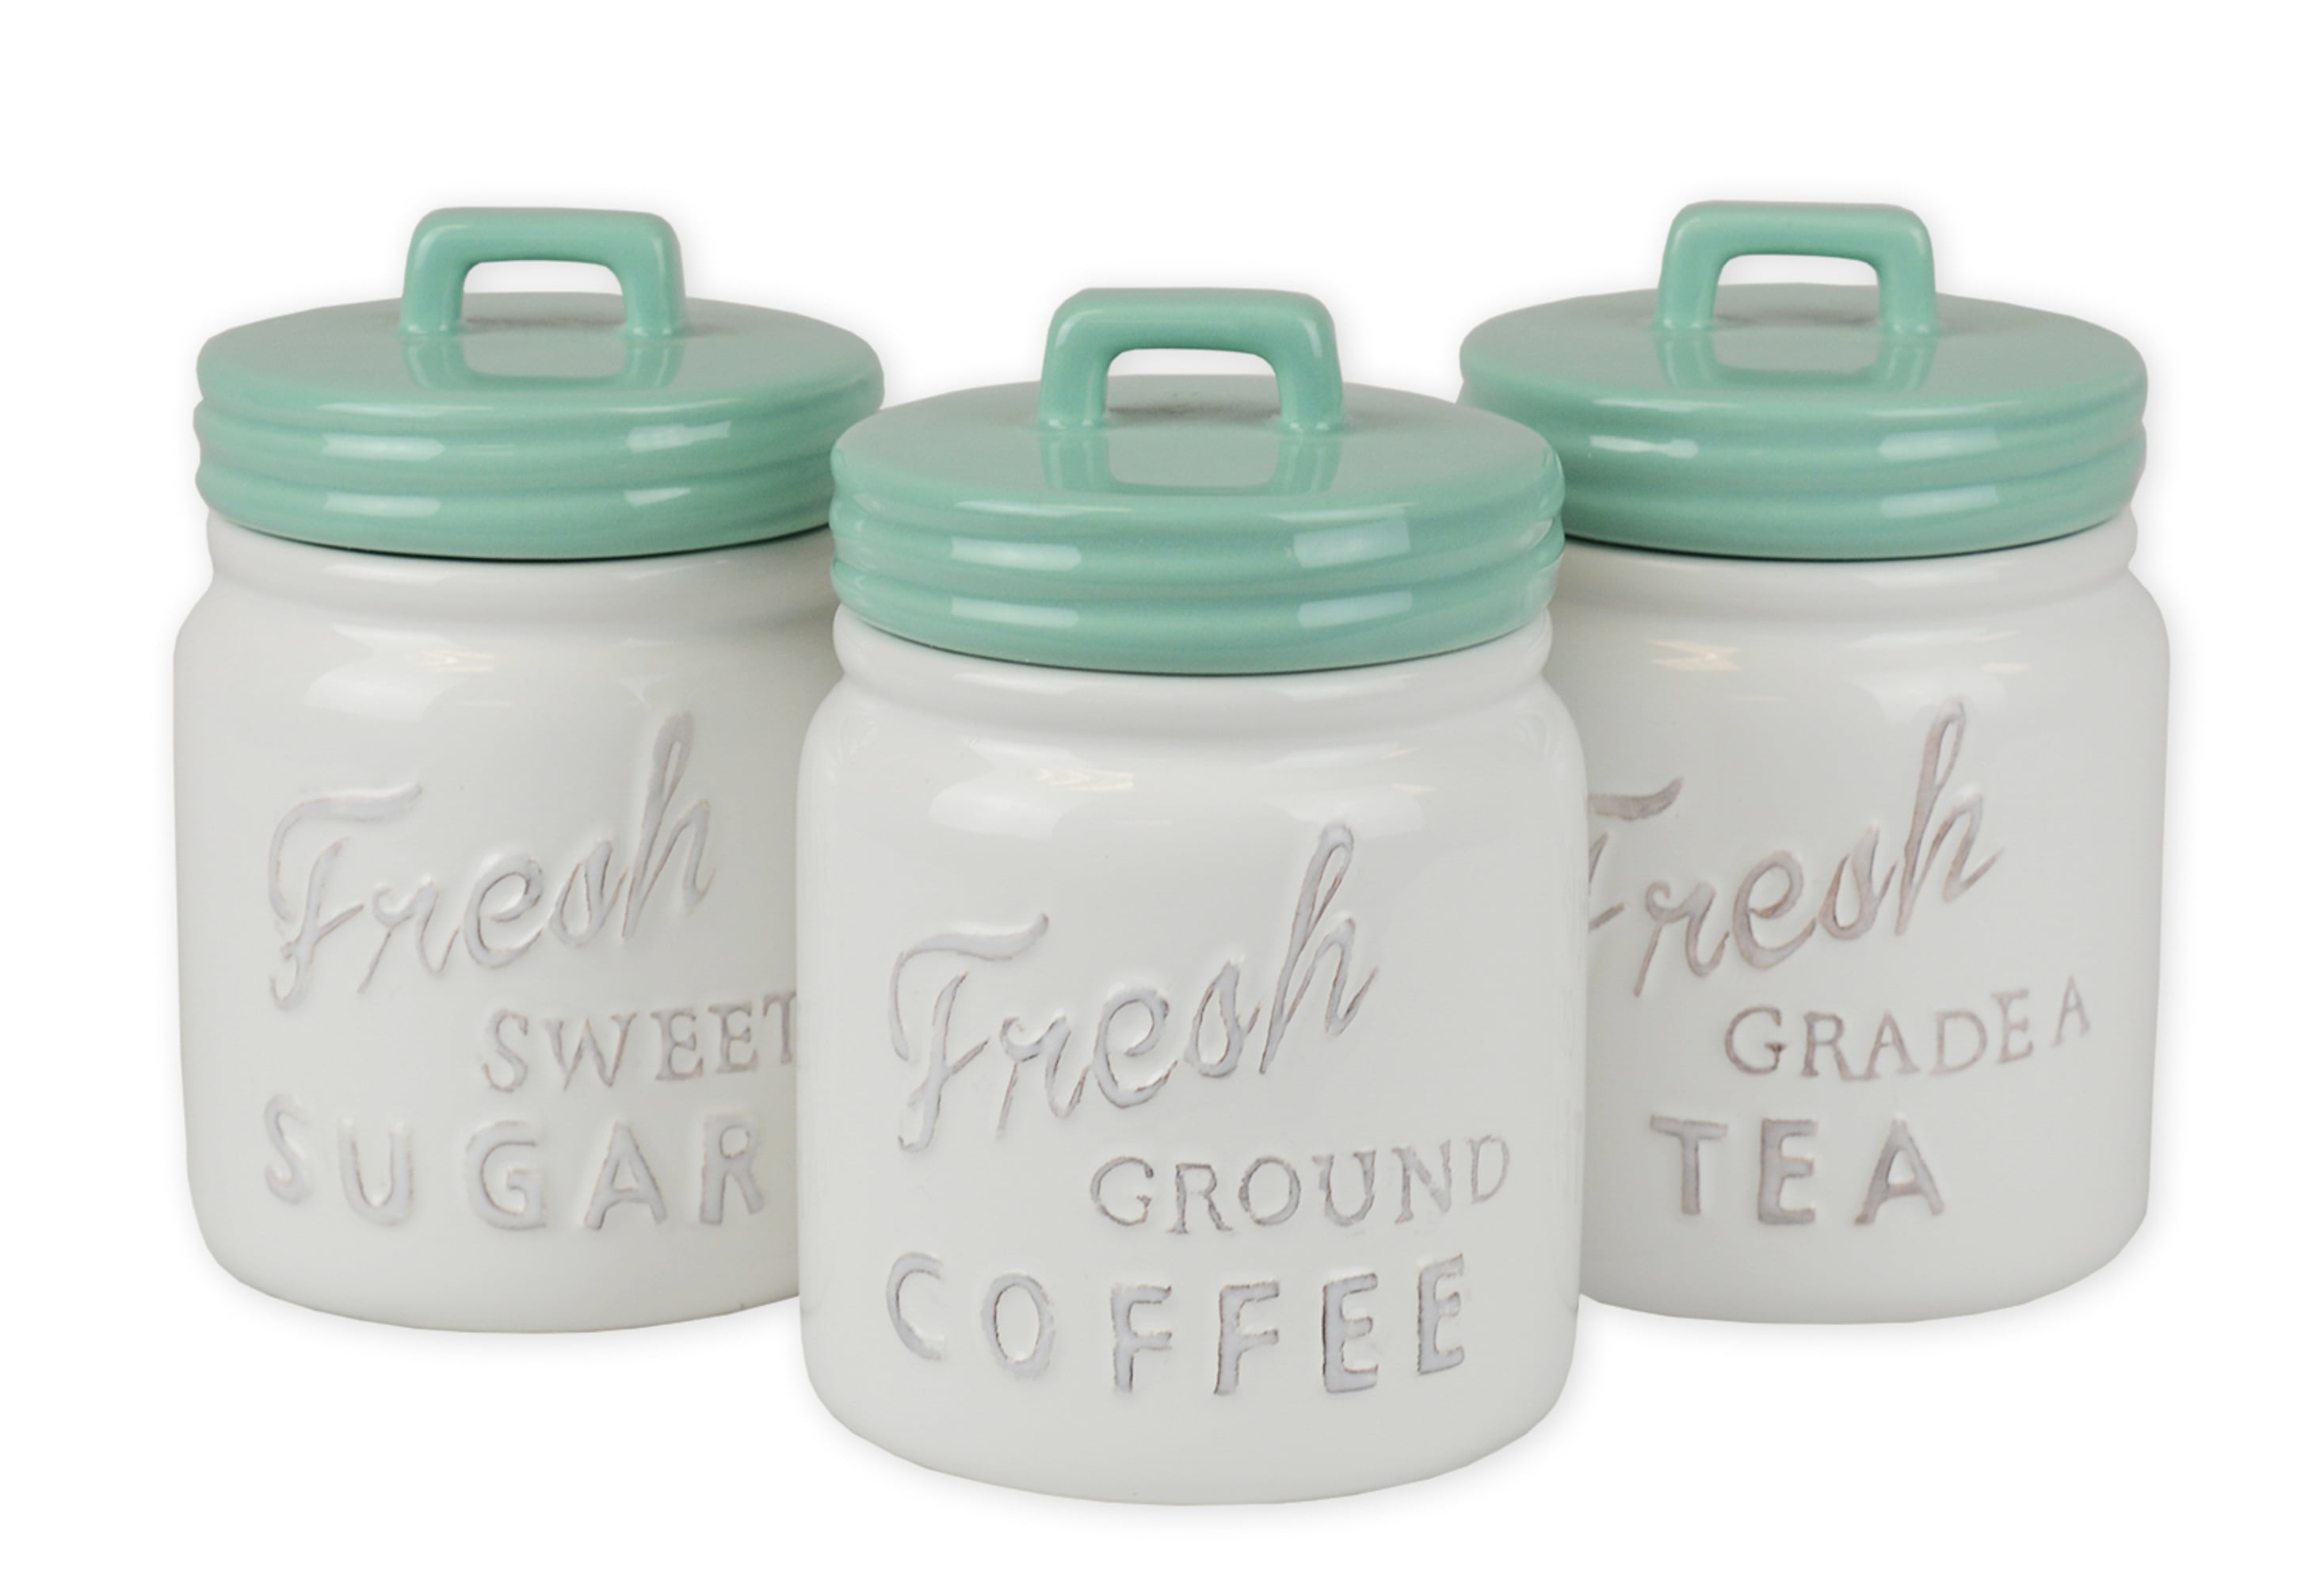 Sugar Storage Canister Kitchen Canisters Jars Pots Jar Container Metal Grey 